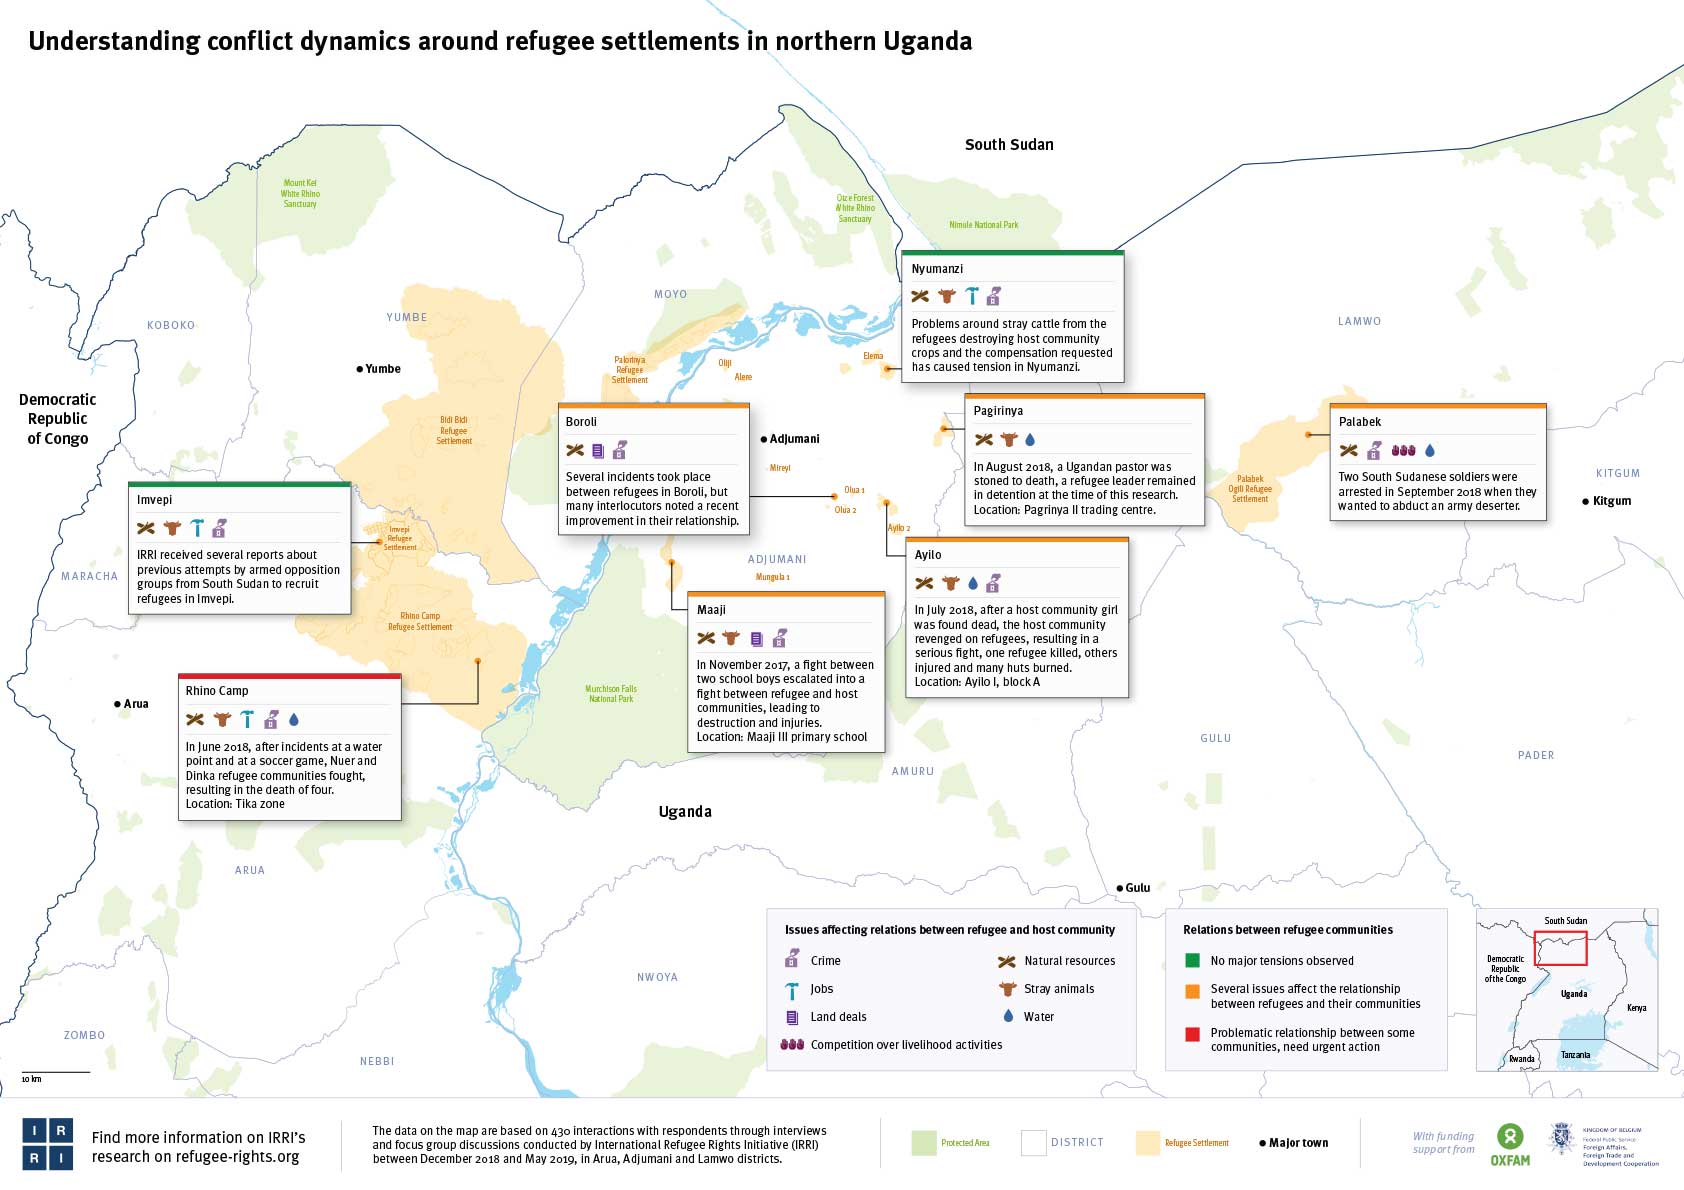 Map of northern Uganda refugee camps with callout boxes highlighting conflict dynamics